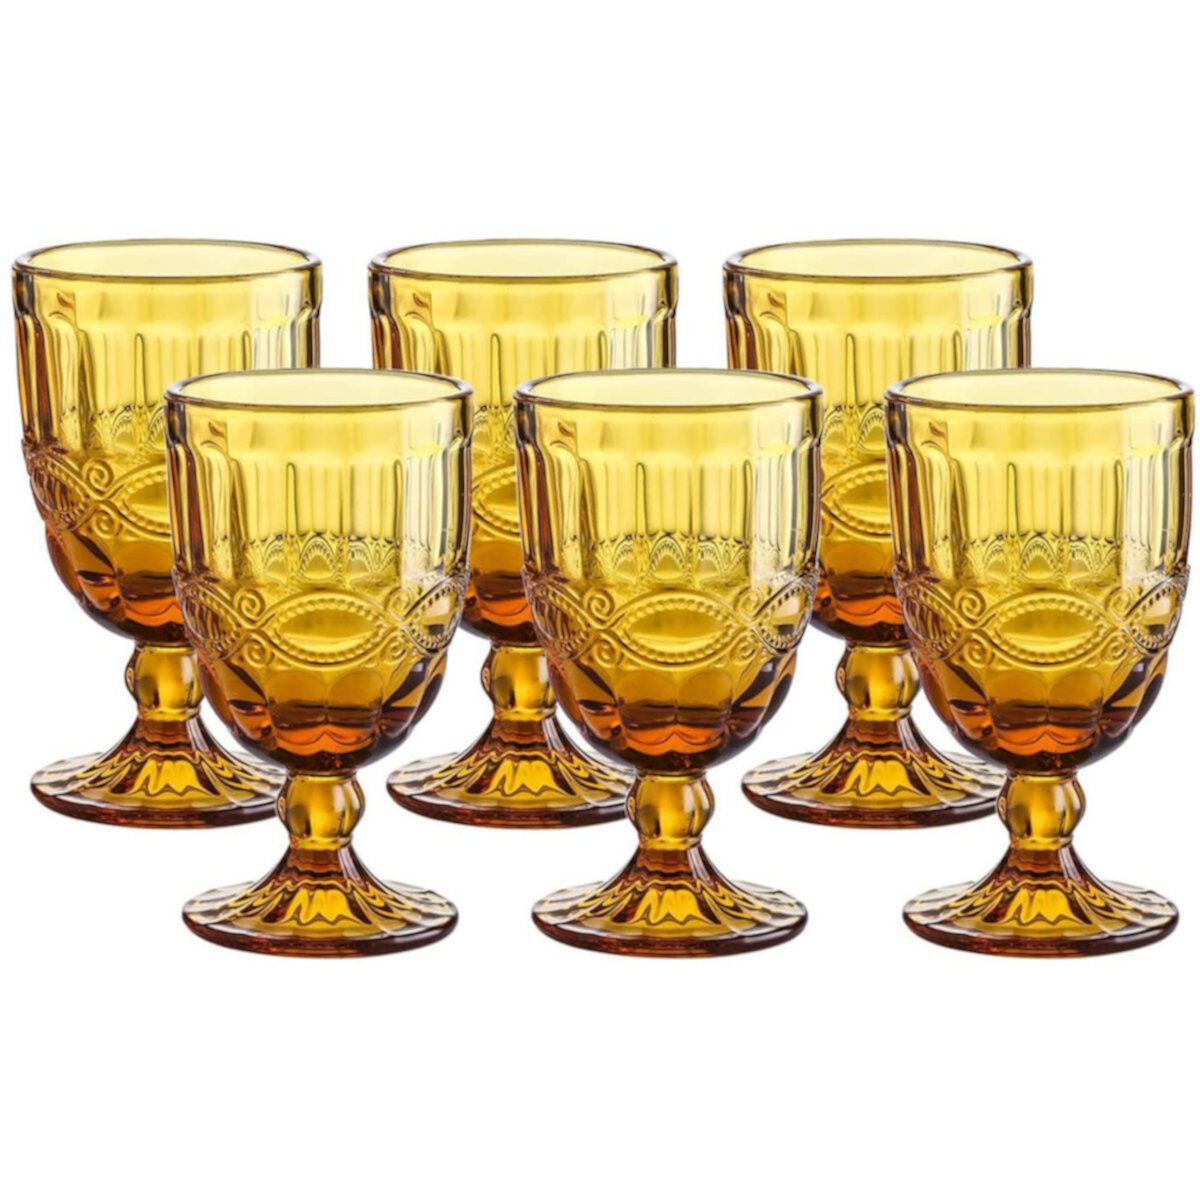 Pressed Pattern Wine Glass Goblet with Stem for Wedding Whole Houseware set of 6 Razor Shopping